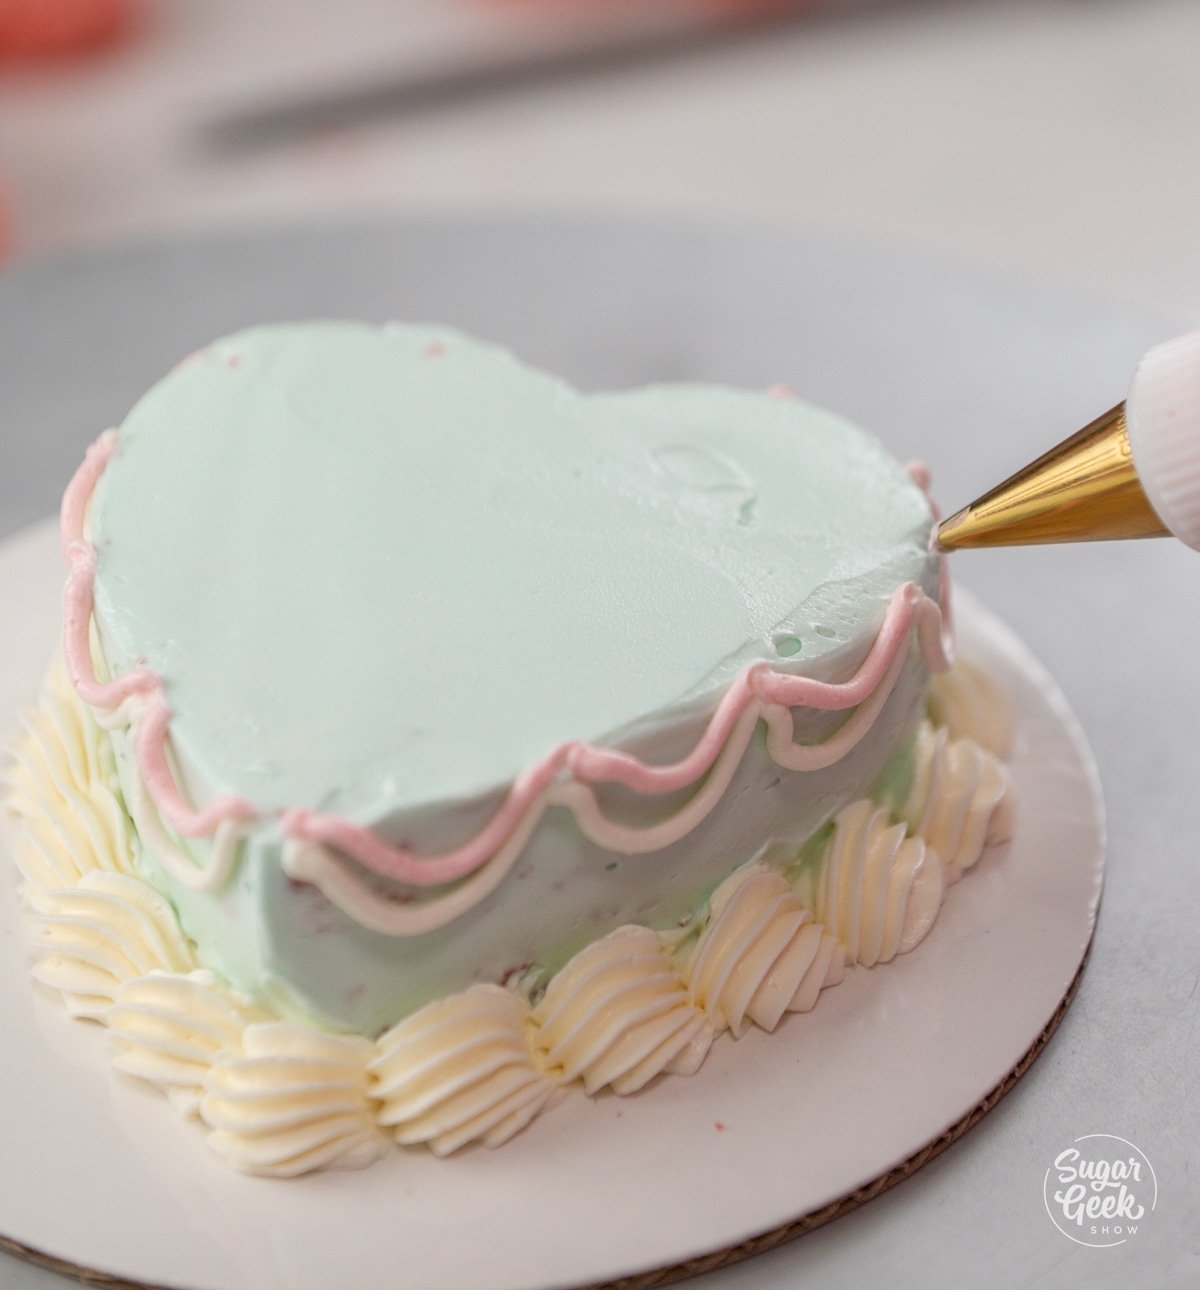 piping bag making a design on the side of a heart cake